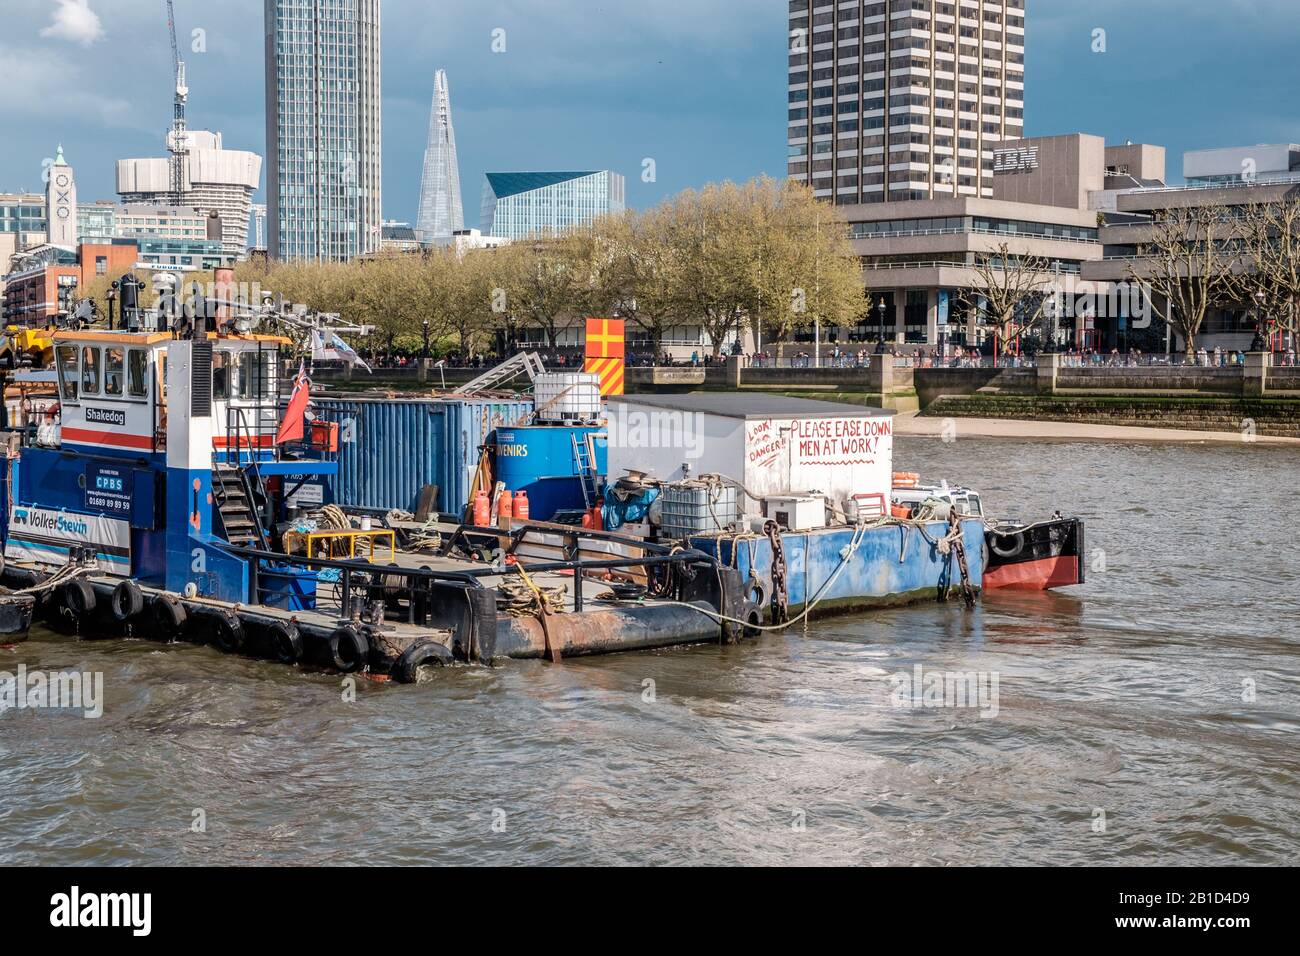 Ferry passing through the south bank of River Thames, London, England Stock Photo